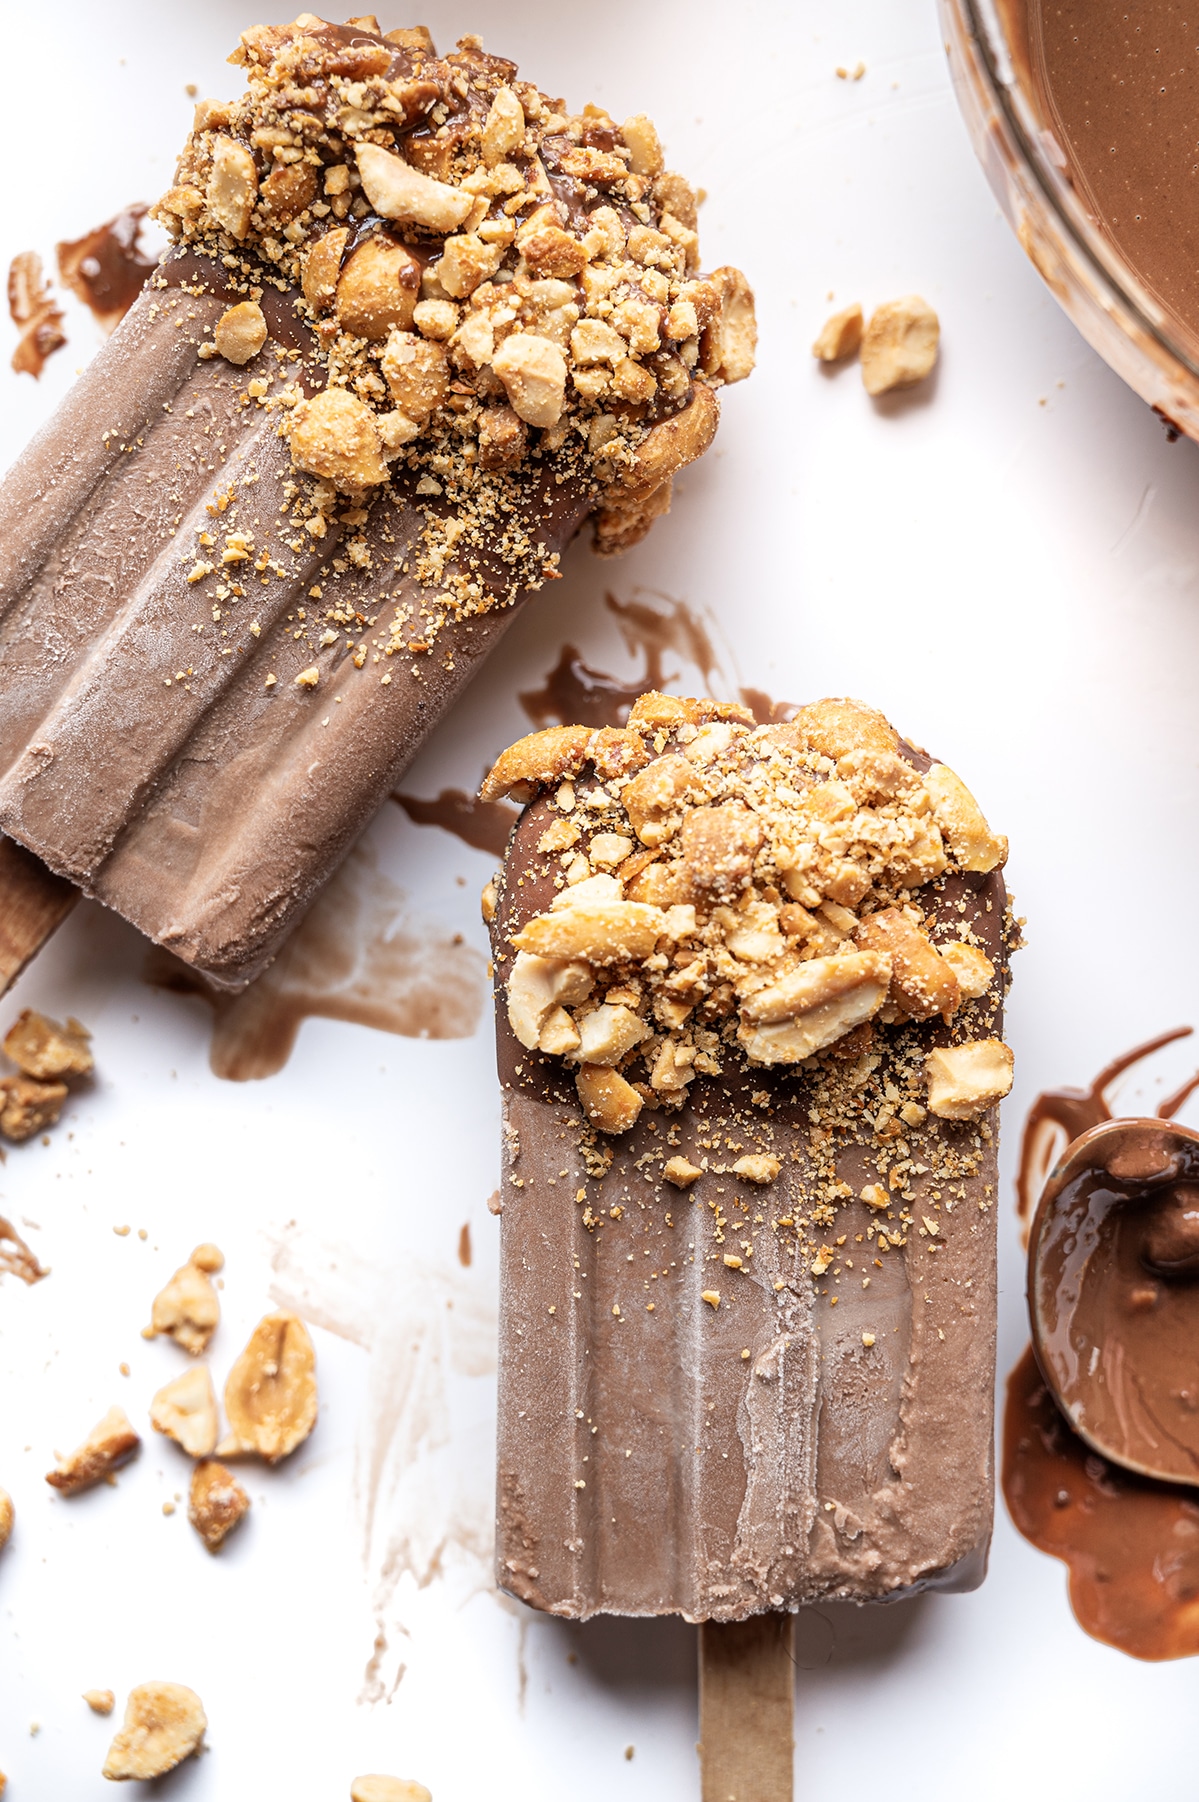 Frozen sugar free fudgesicles melting on a bright white background with smeared chocolate spoon and scattered crushed peanuts